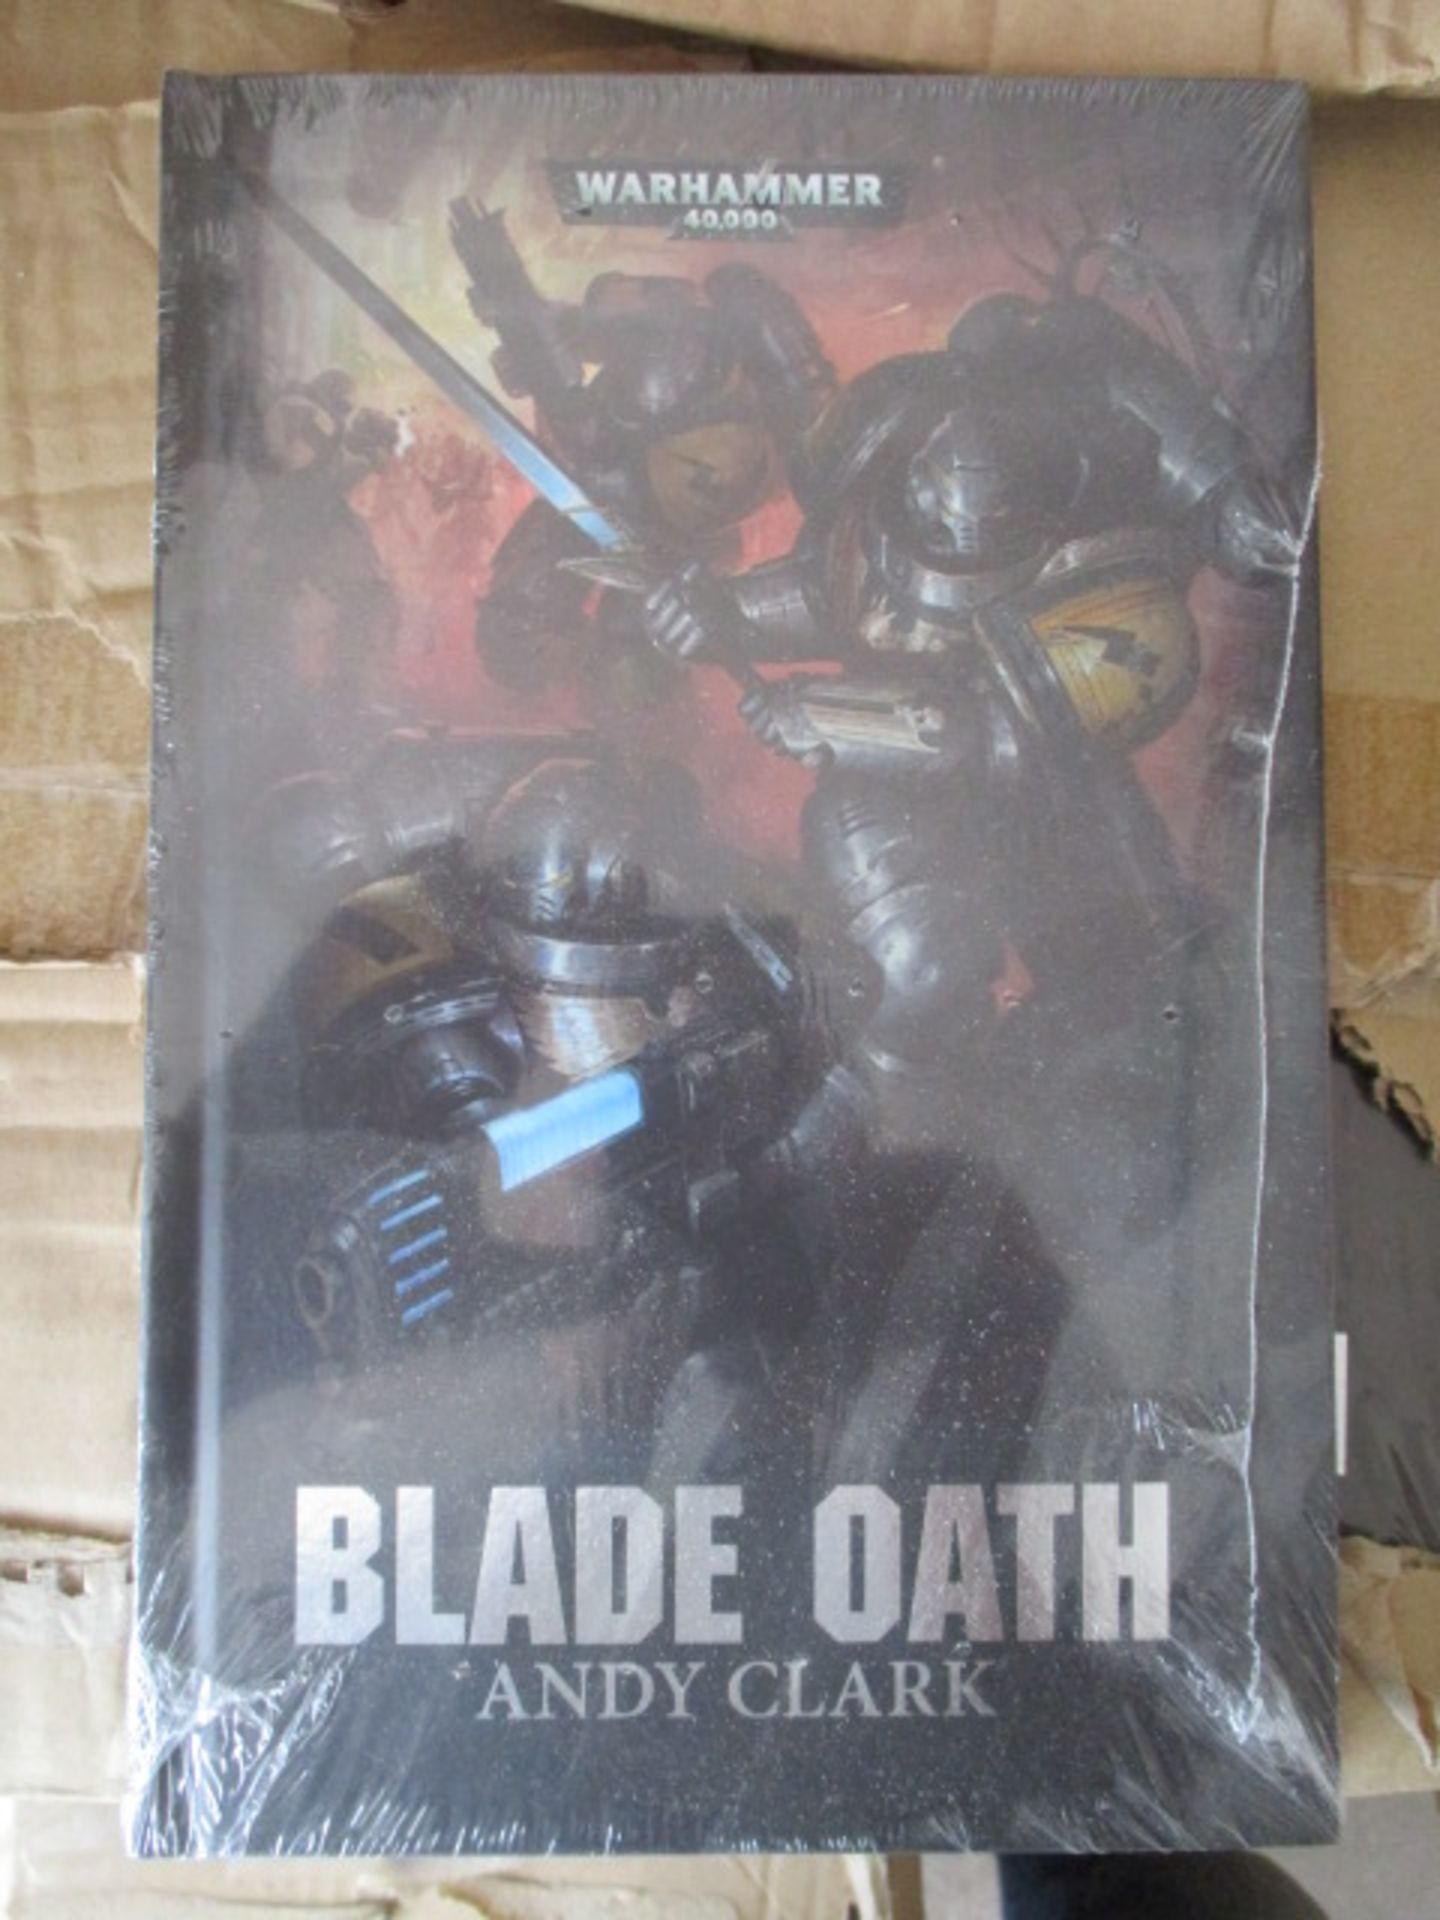 100pcs Brand new sealed Blade Oath book , rrp £9.99 - Image 2 of 2